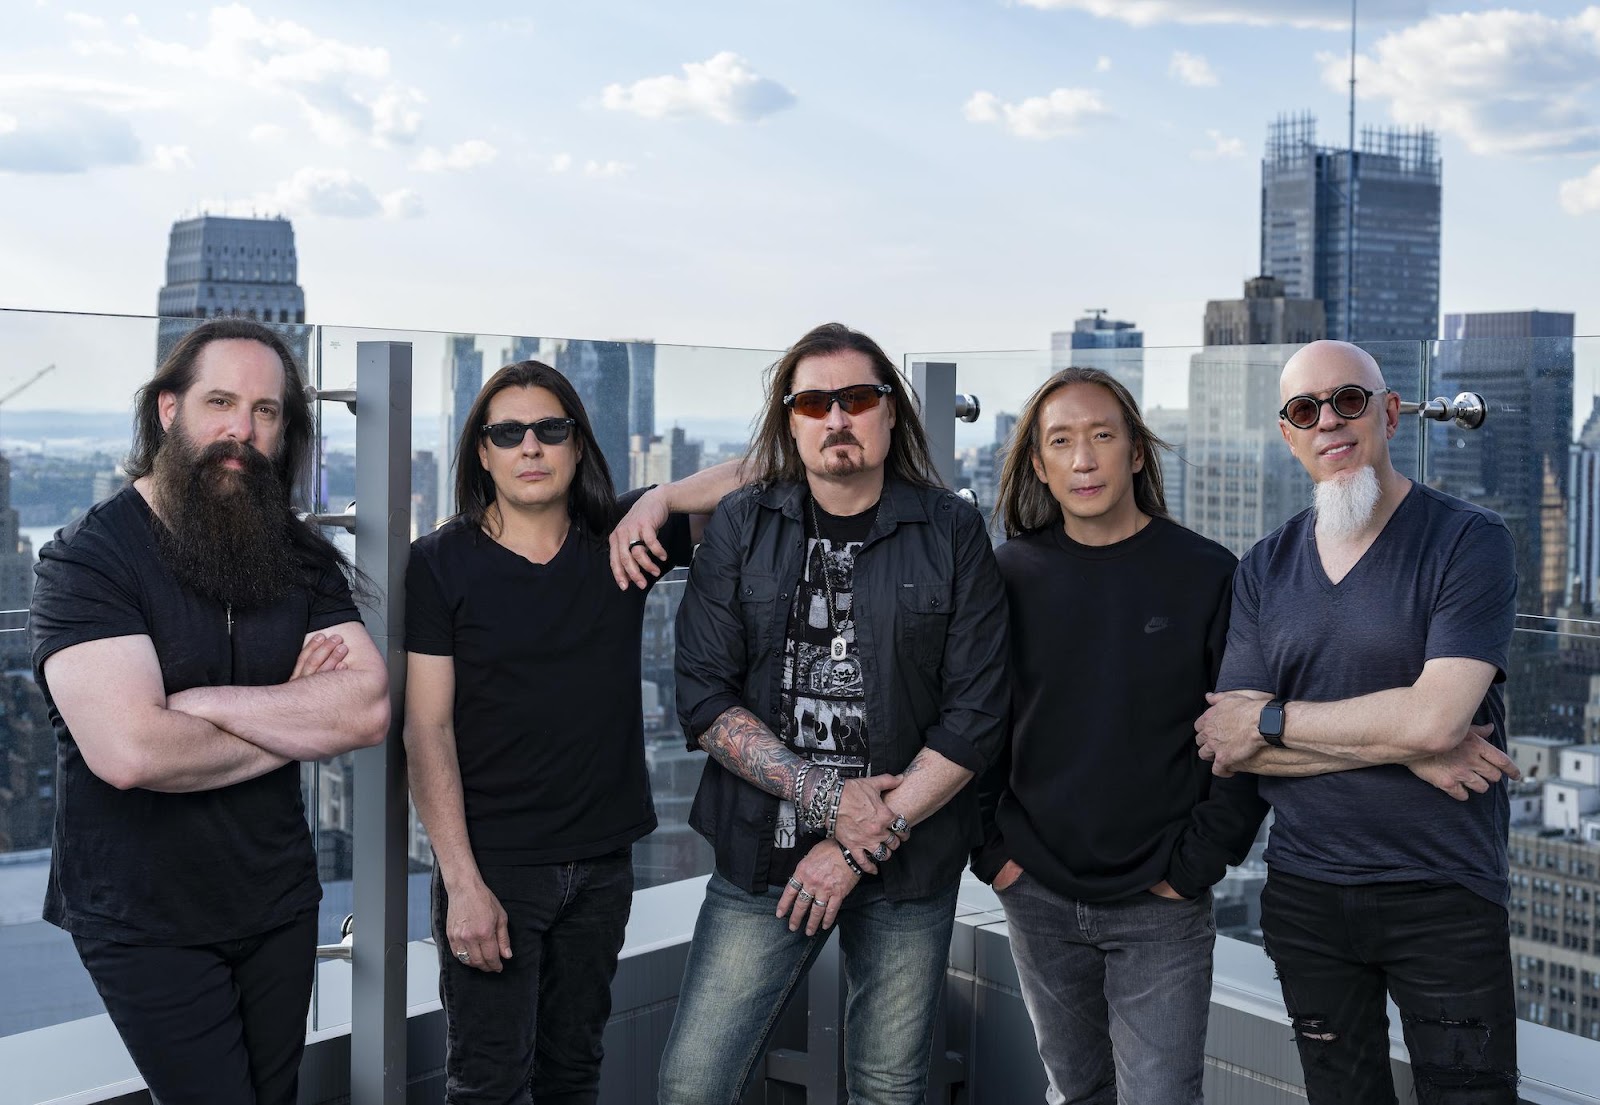 DREAM THEATER released music video for “Invisible Monster”.